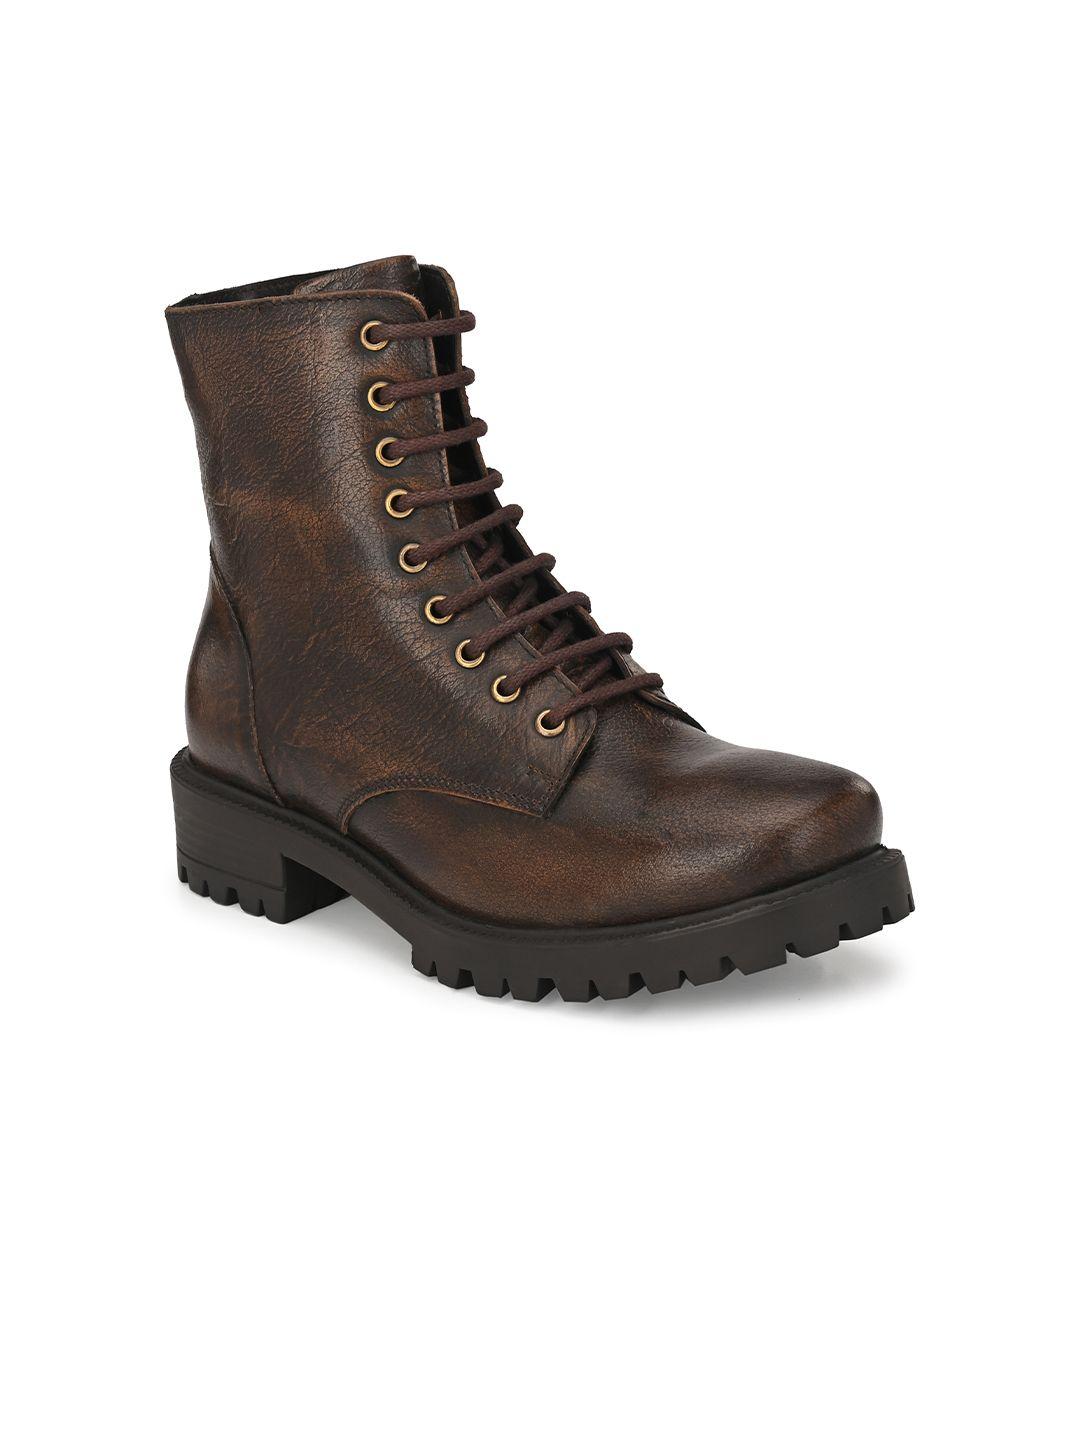 carlo romano women brown solid leather high-top flat boots